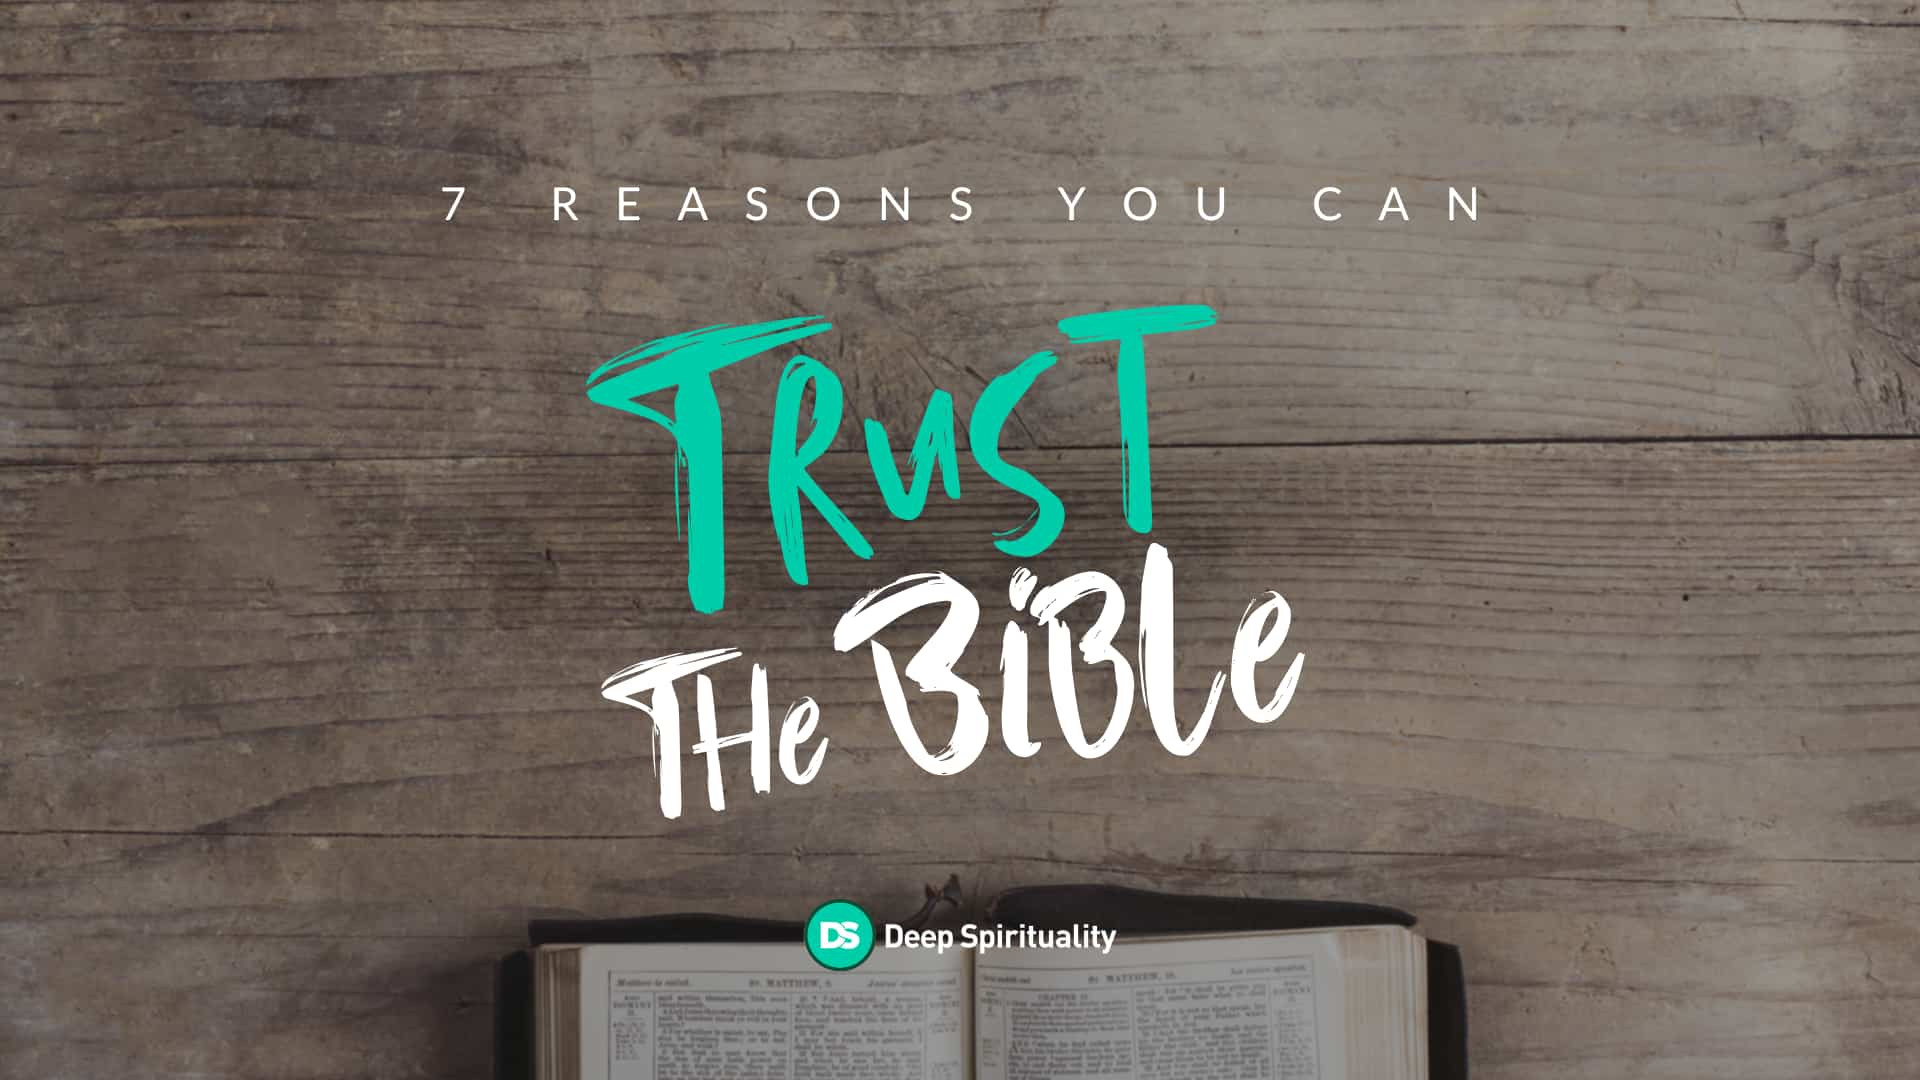 7 Reasons You Can Trust the Bible 61